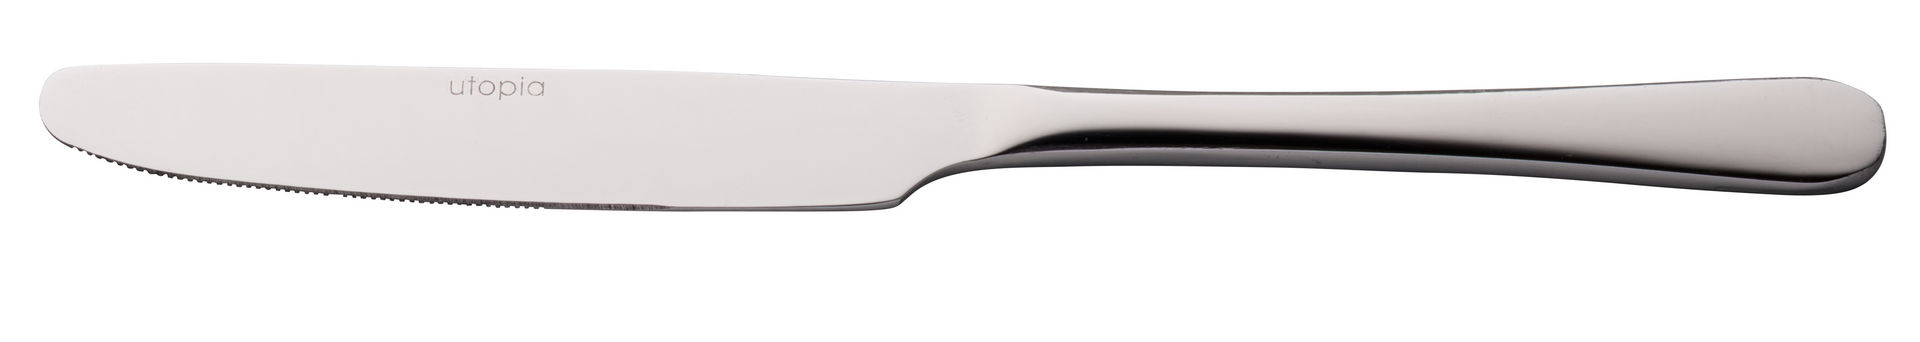 Gourmet Table Knife - F10202-000000-B01012 (Pack of 12)